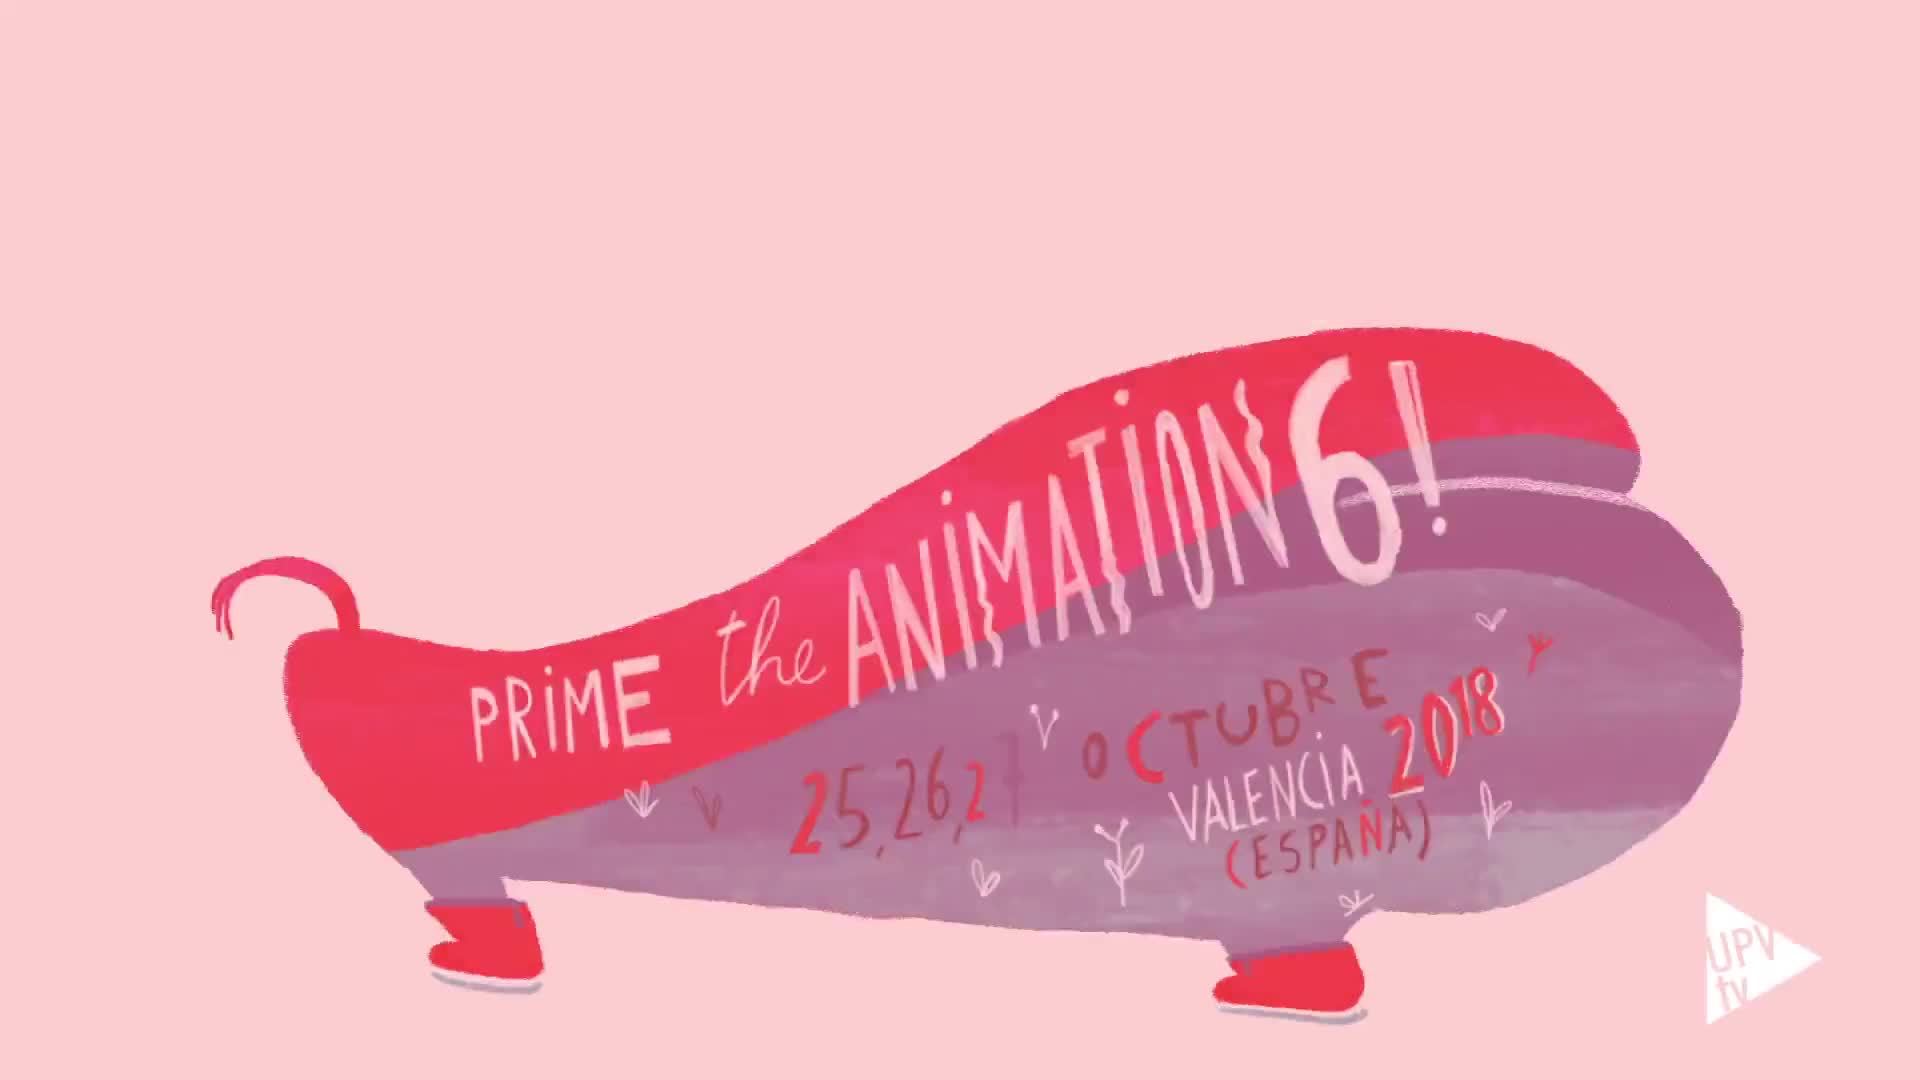 26-10-2018 Prime the Animation 6!